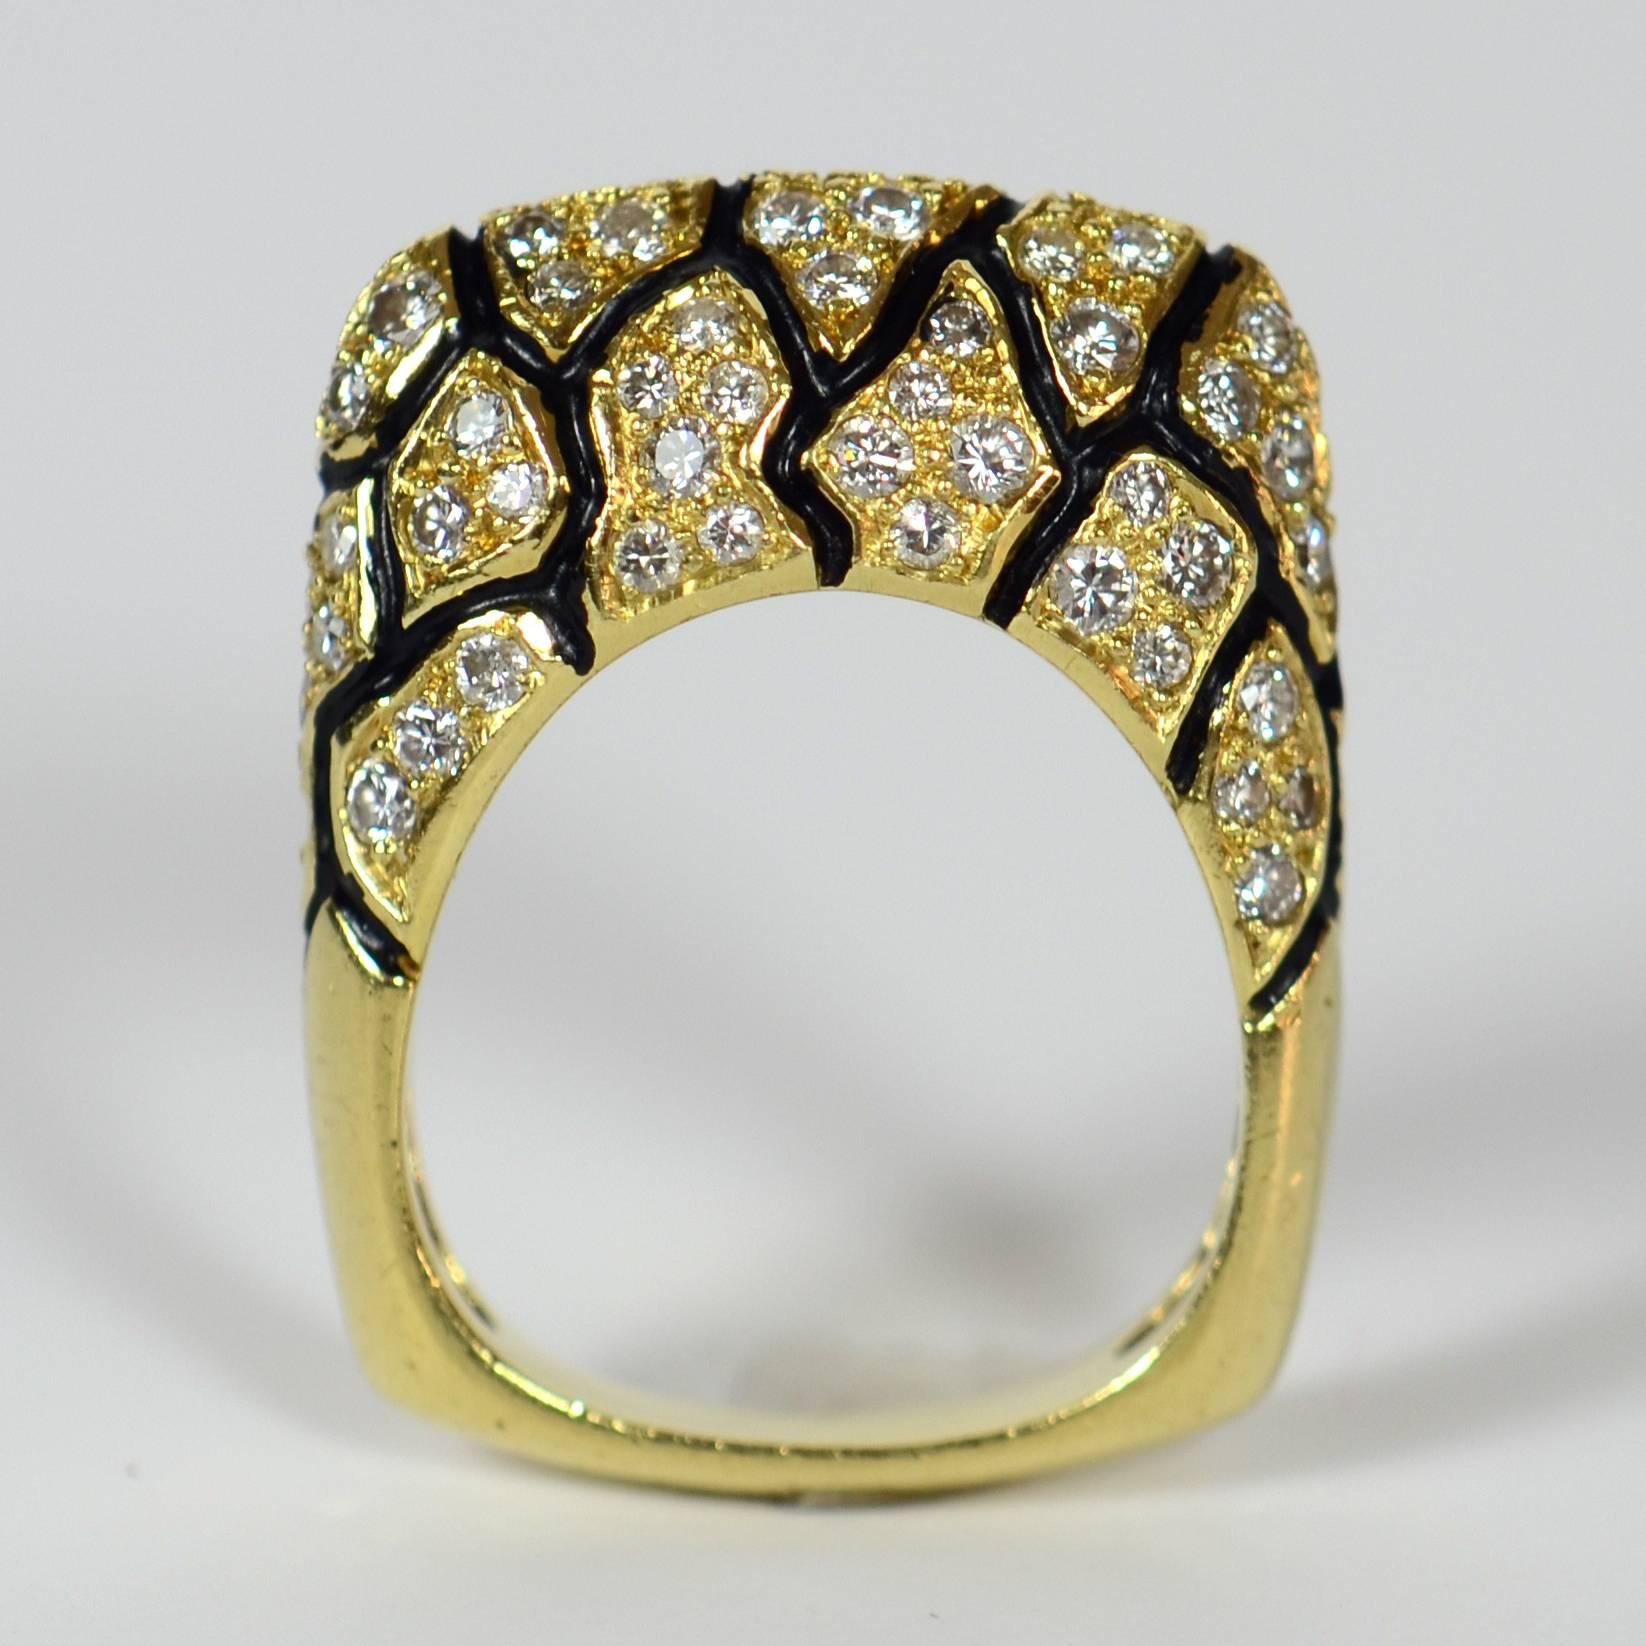 A fabulous animal-print 18 karat gold, enamel and diamond ring by La Triomphe.  

This bold and decidedly cool ring is set with 2.50 carats of white diamonds, separated into groups by undulating lines of black enamel.  The shank has a smooth squared